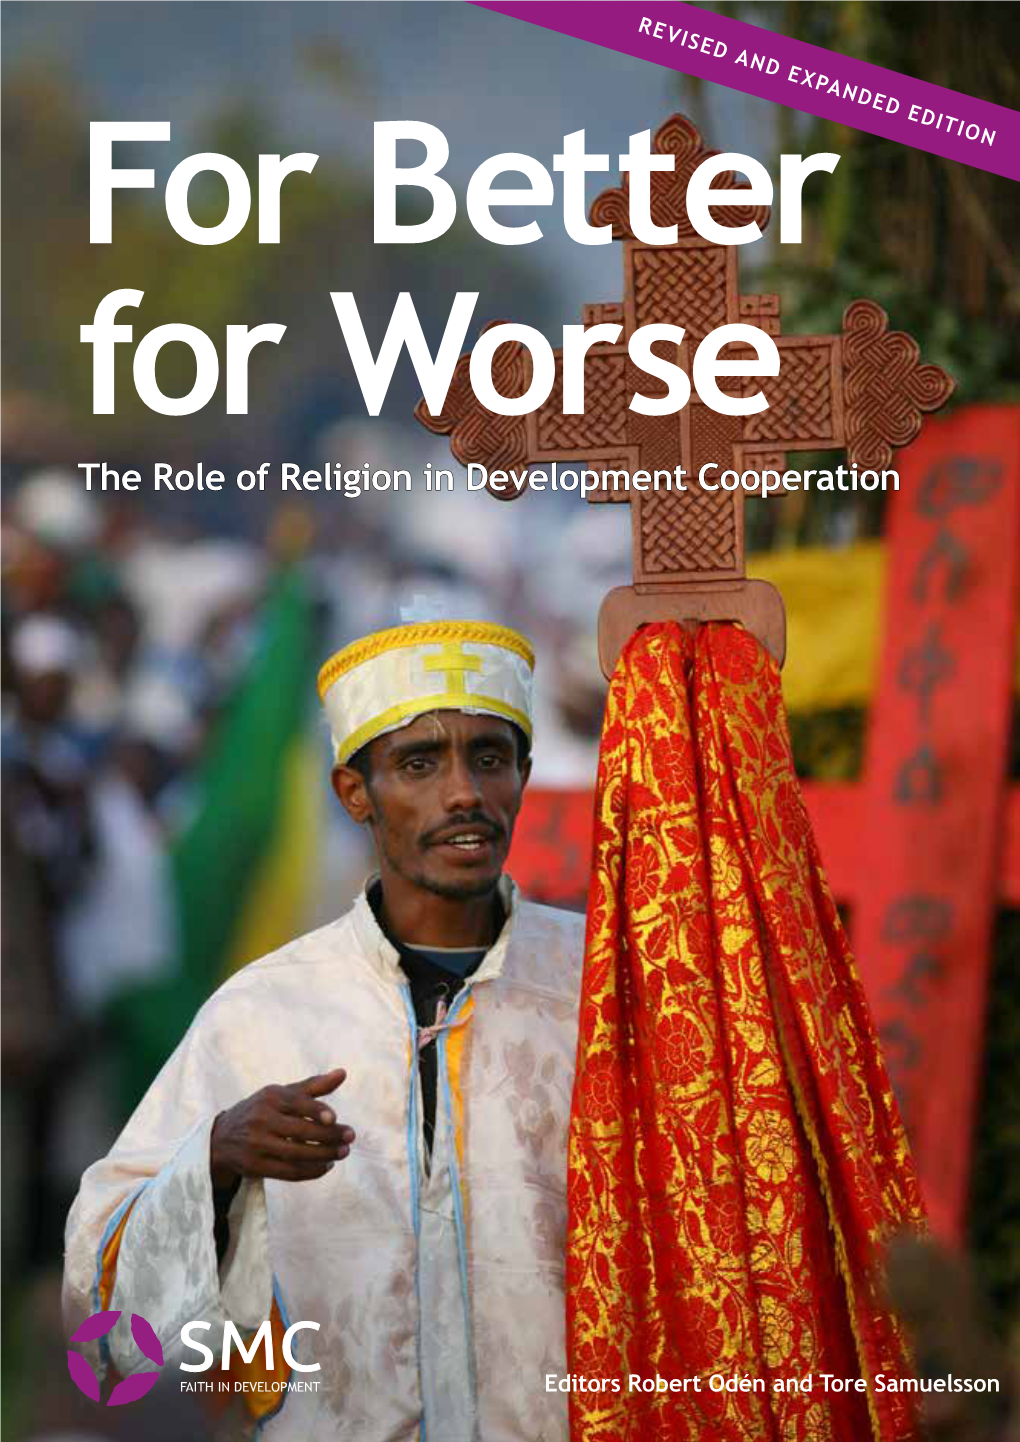 For Better for Worse: the Role of Religion in Development Cooperation